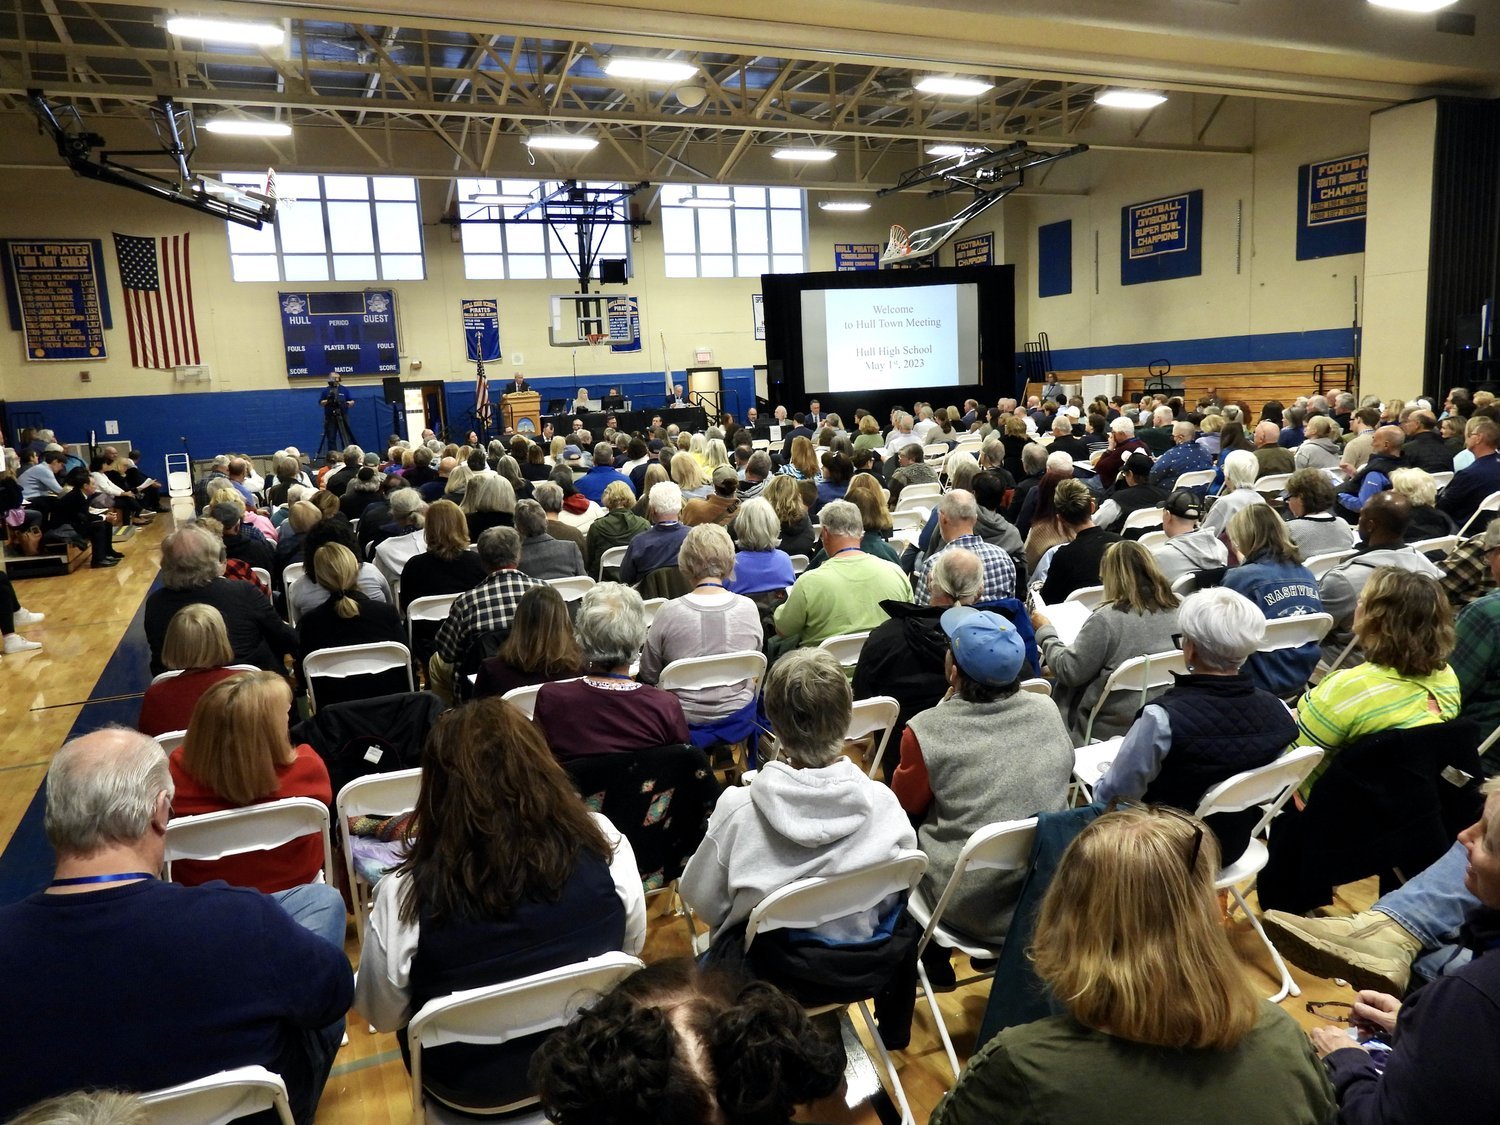 Hull's Annual Town Meeting is Monday, May 6, and The Hull Times is your one-stop shop for all the resources you need to learn about the issues. Click the link in our bio for the full warrant, budget documents, links to past news stories, and links to